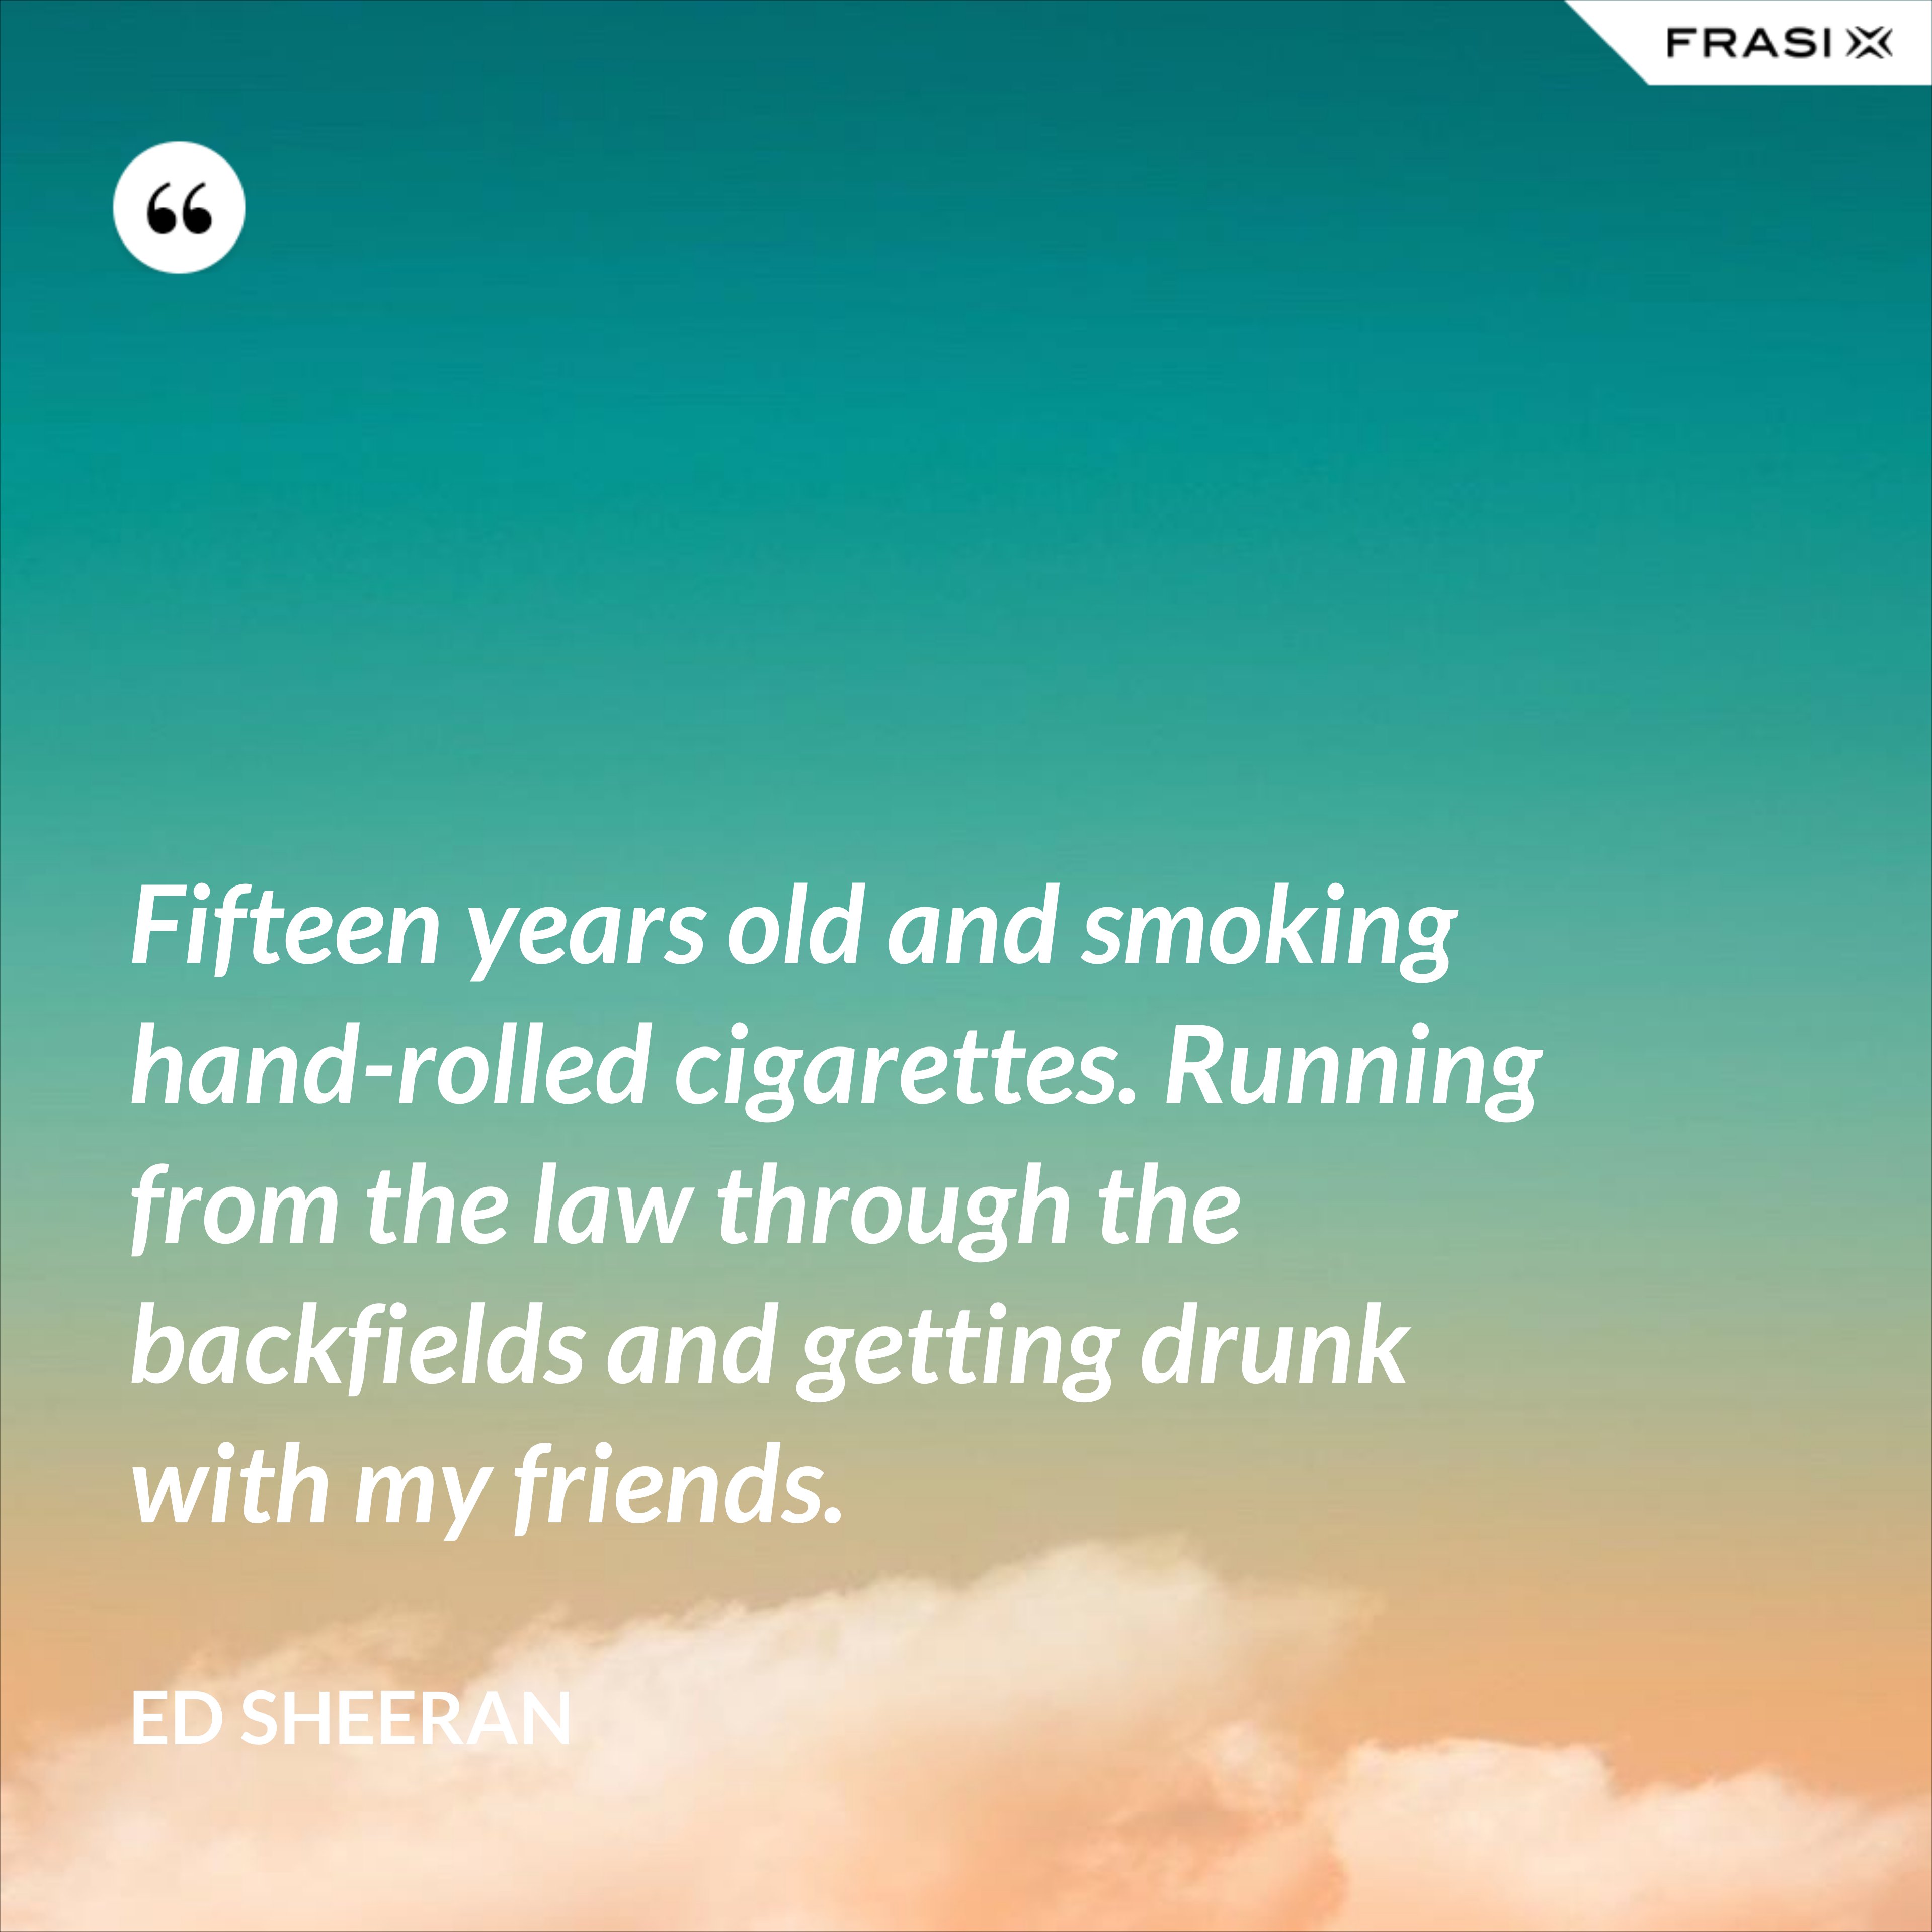 Fifteen years old and smoking hand-rolled cigarettes. Running from the law through the backfields and getting drunk with my friends. - Ed Sheeran